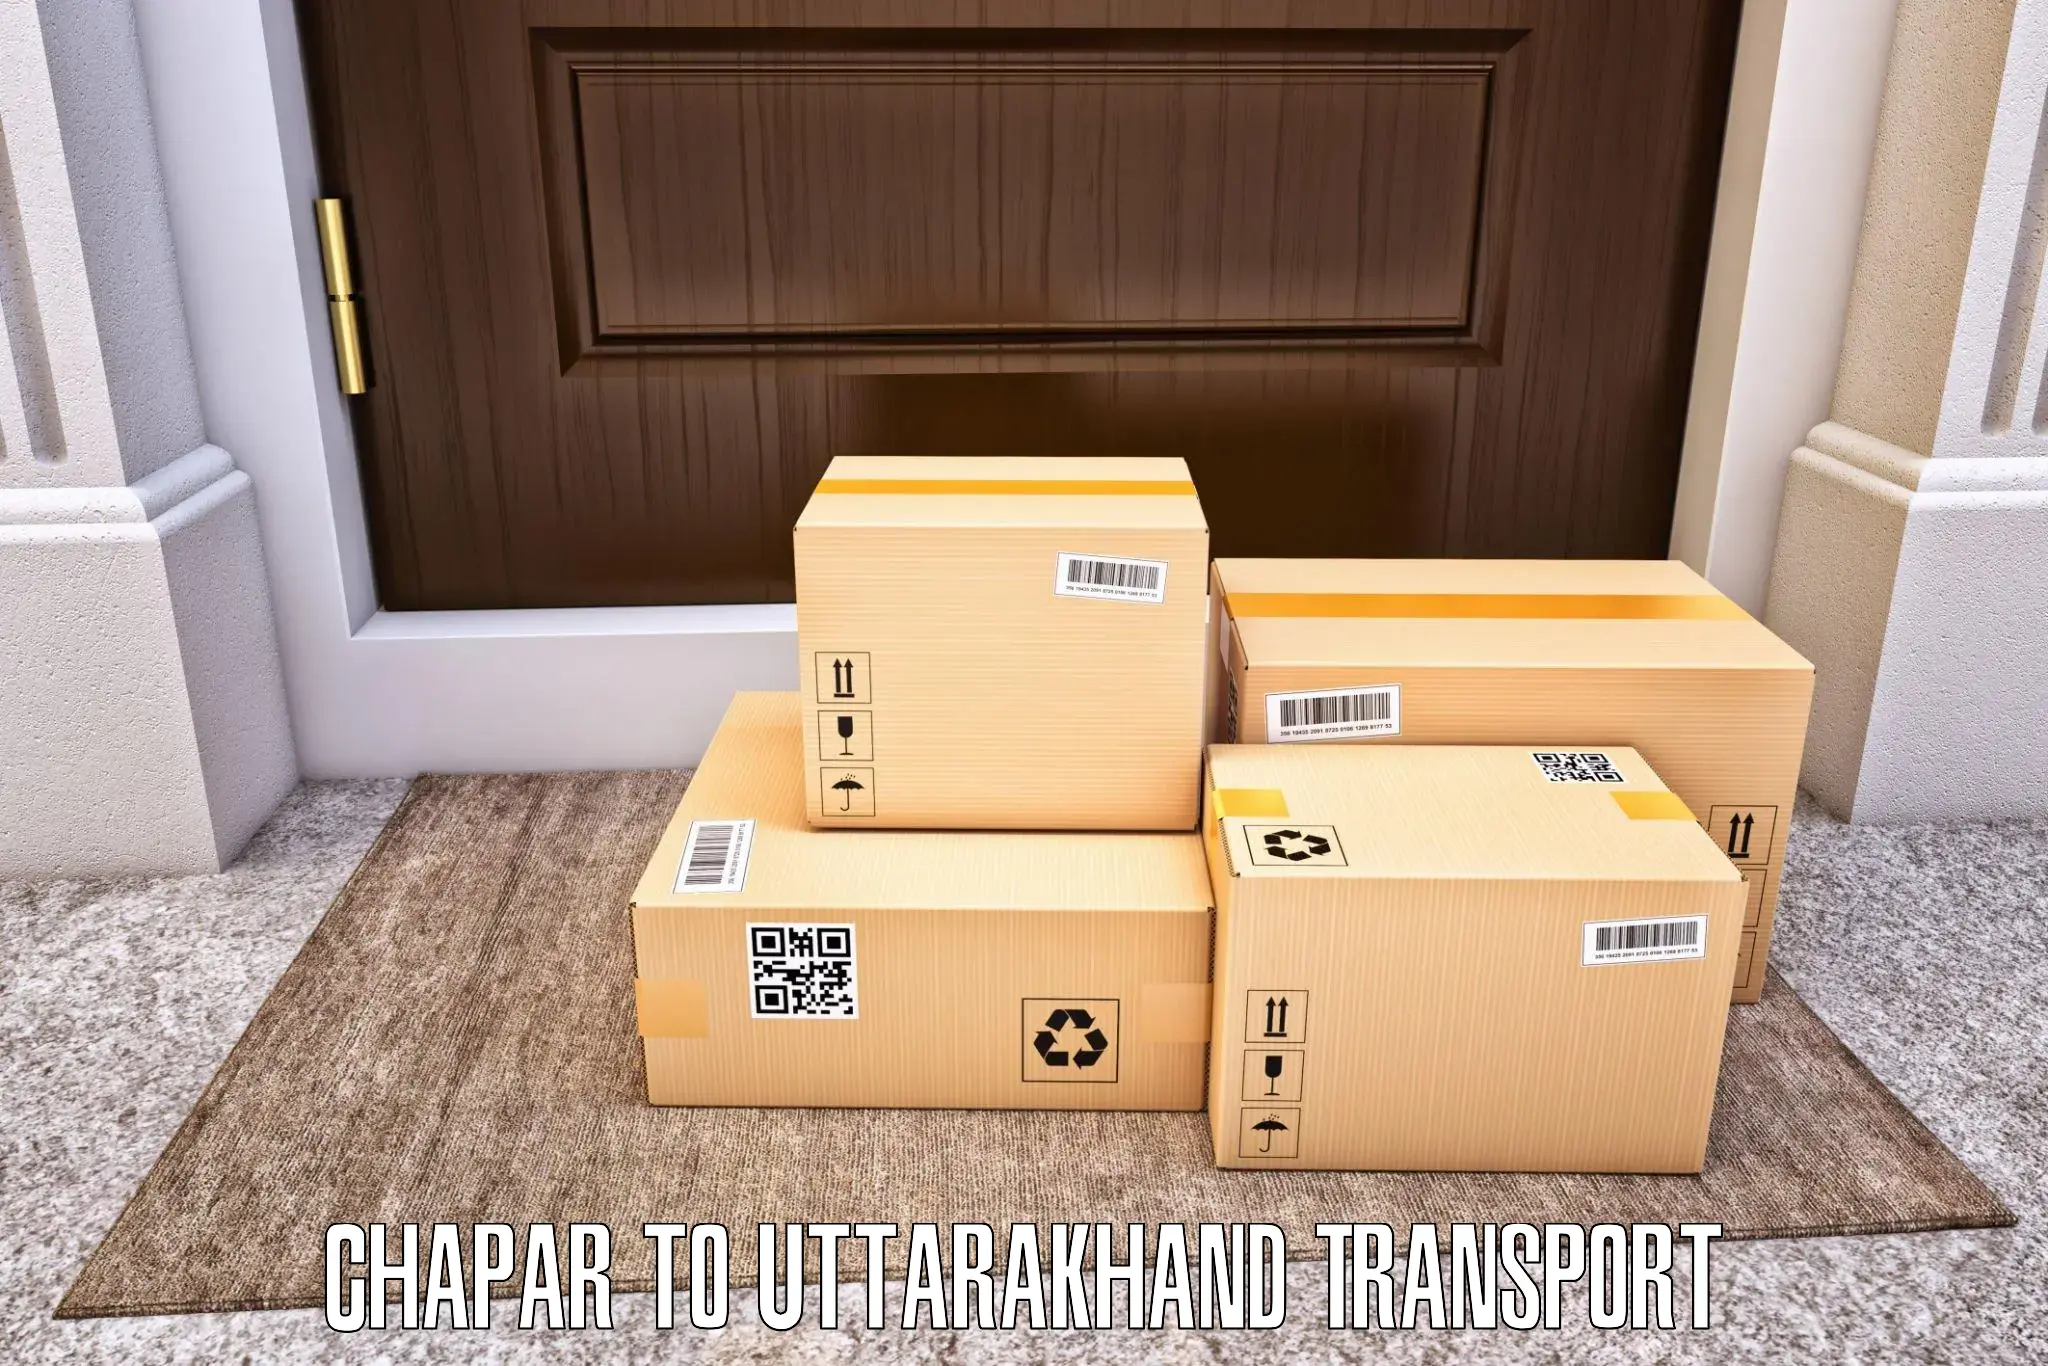 Container transport service in Chapar to Gopeshwar